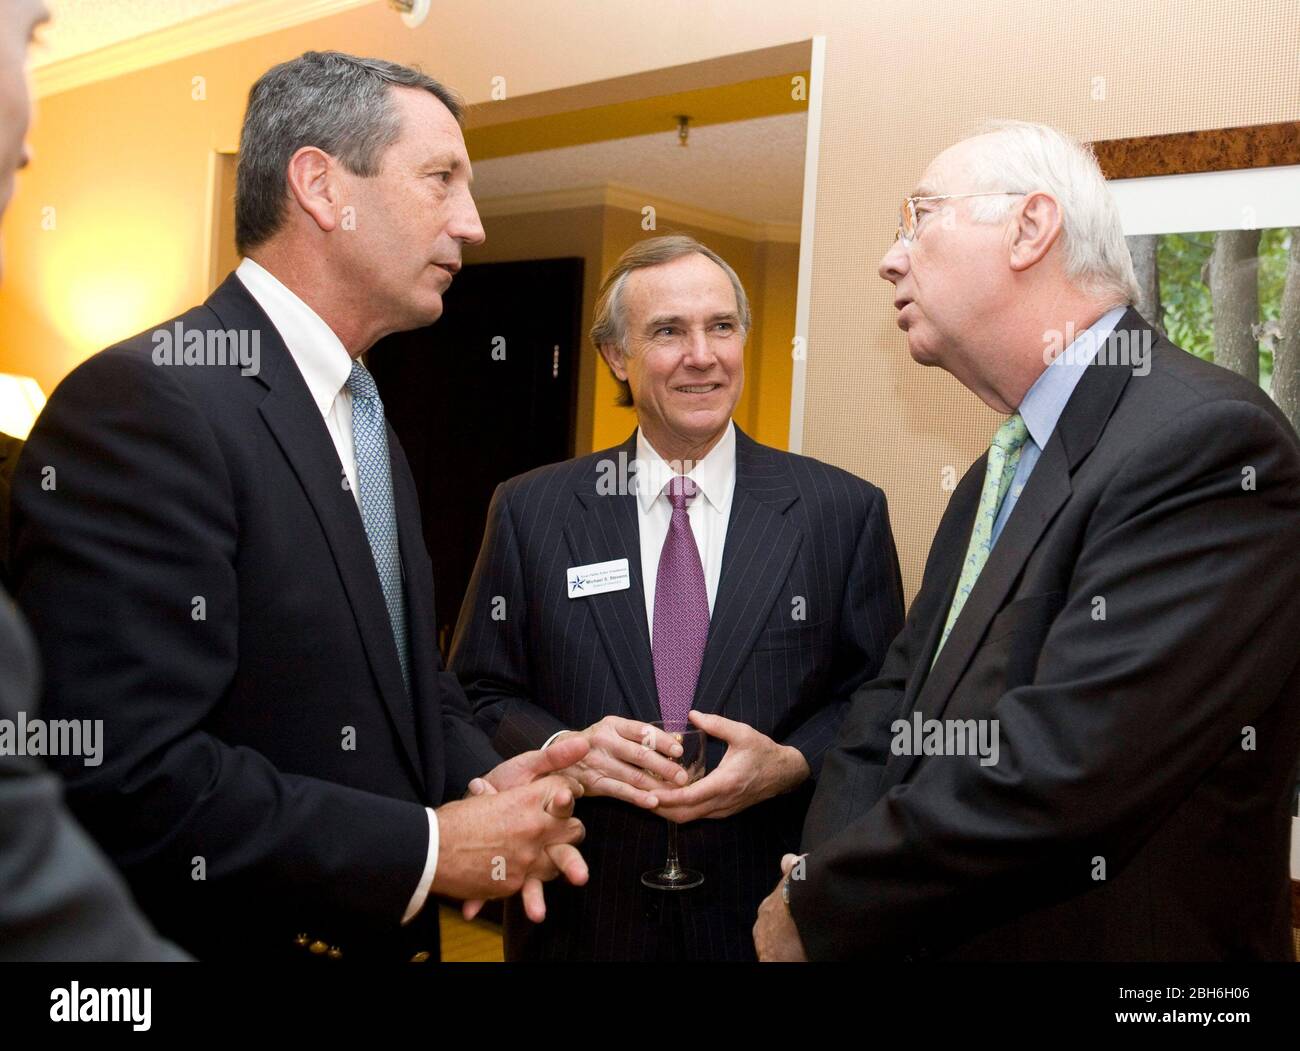 Austin, TX January 10, 2008: Conservative South Carolina Governor Mark Sanford (l) at the Texas Public Policy Foundation dinner speaking with conservative former Sen. Phil Gramm (r), Both have been mentioned as a possible Vice-Presidential picks for 2008.  At center is lobbyist Michael Stevens.    ©Bob Daemmrich Stock Photo